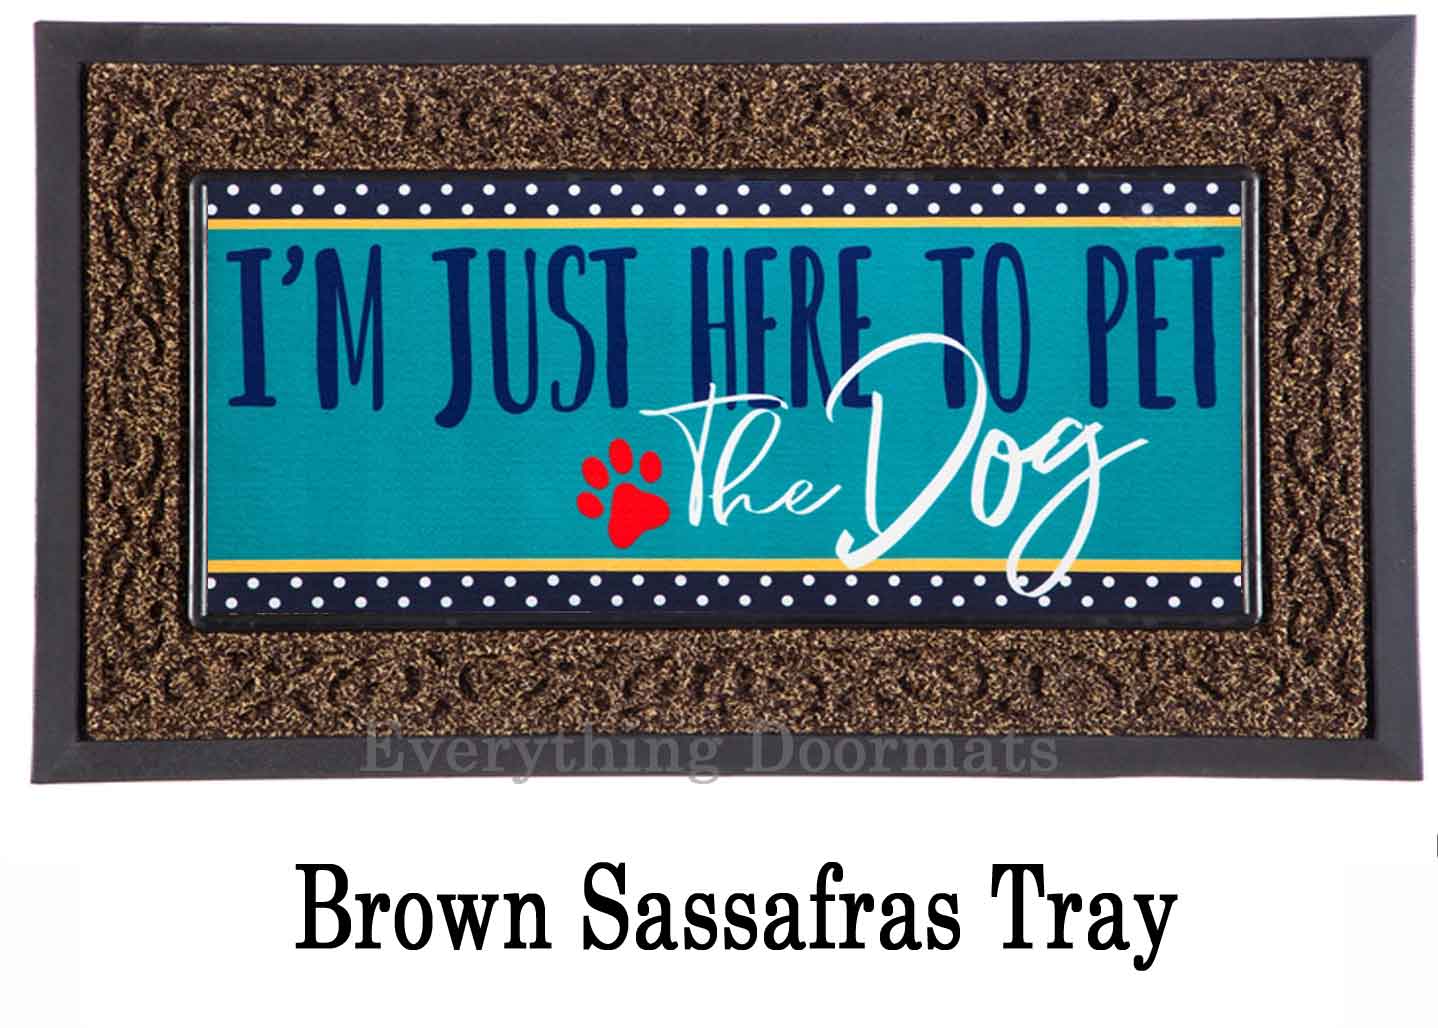 https://www.everythingdoormats.com/images/products/her-to-pet-the-dog-sassafras-switch-insert-doormat-in-brown-insert-tray.jpg